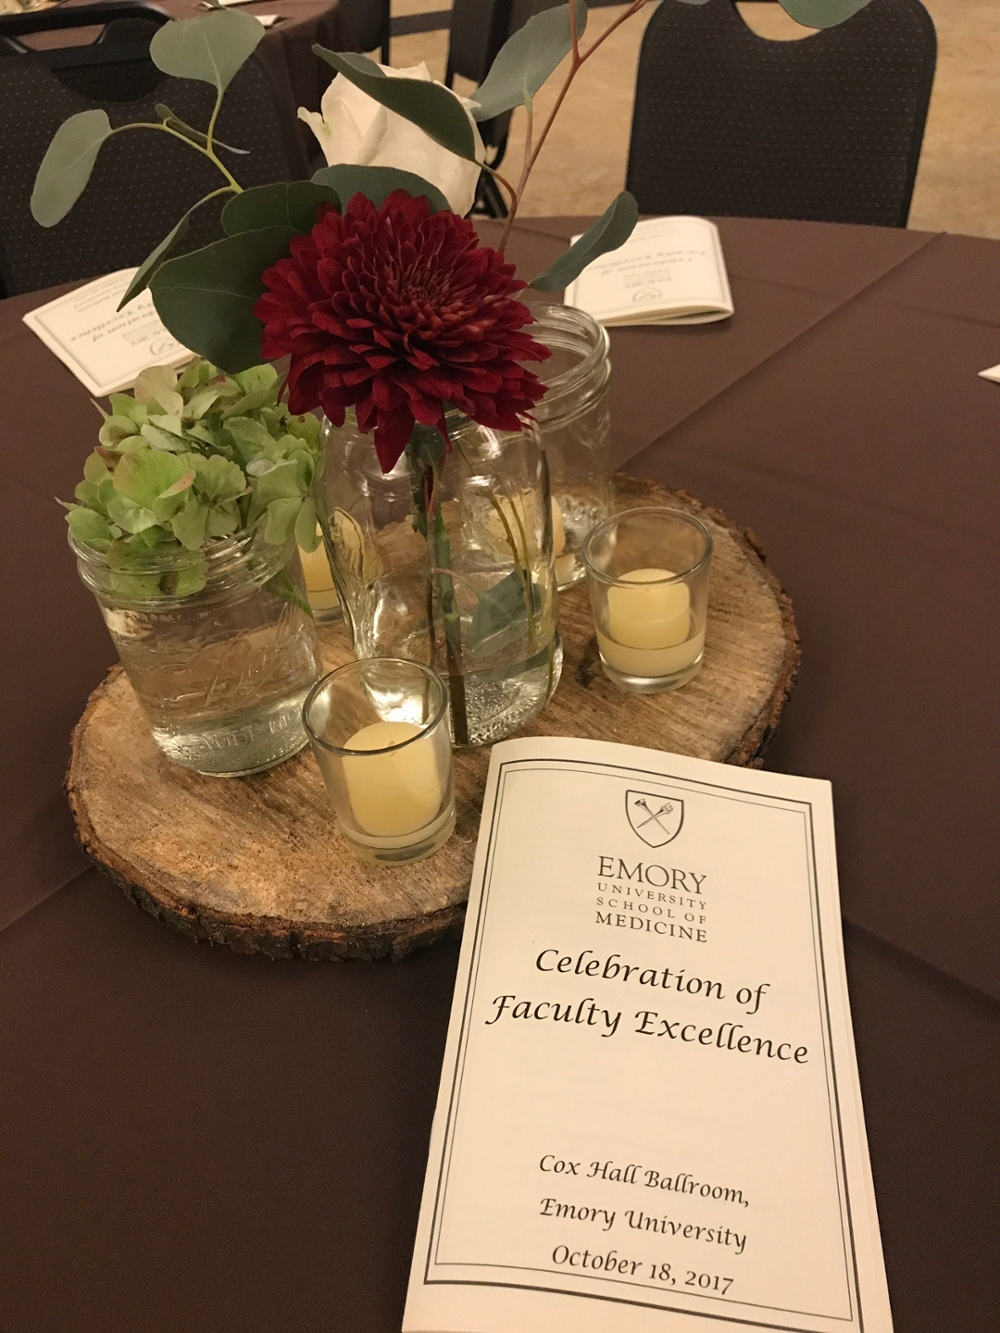 Event program on decorated table